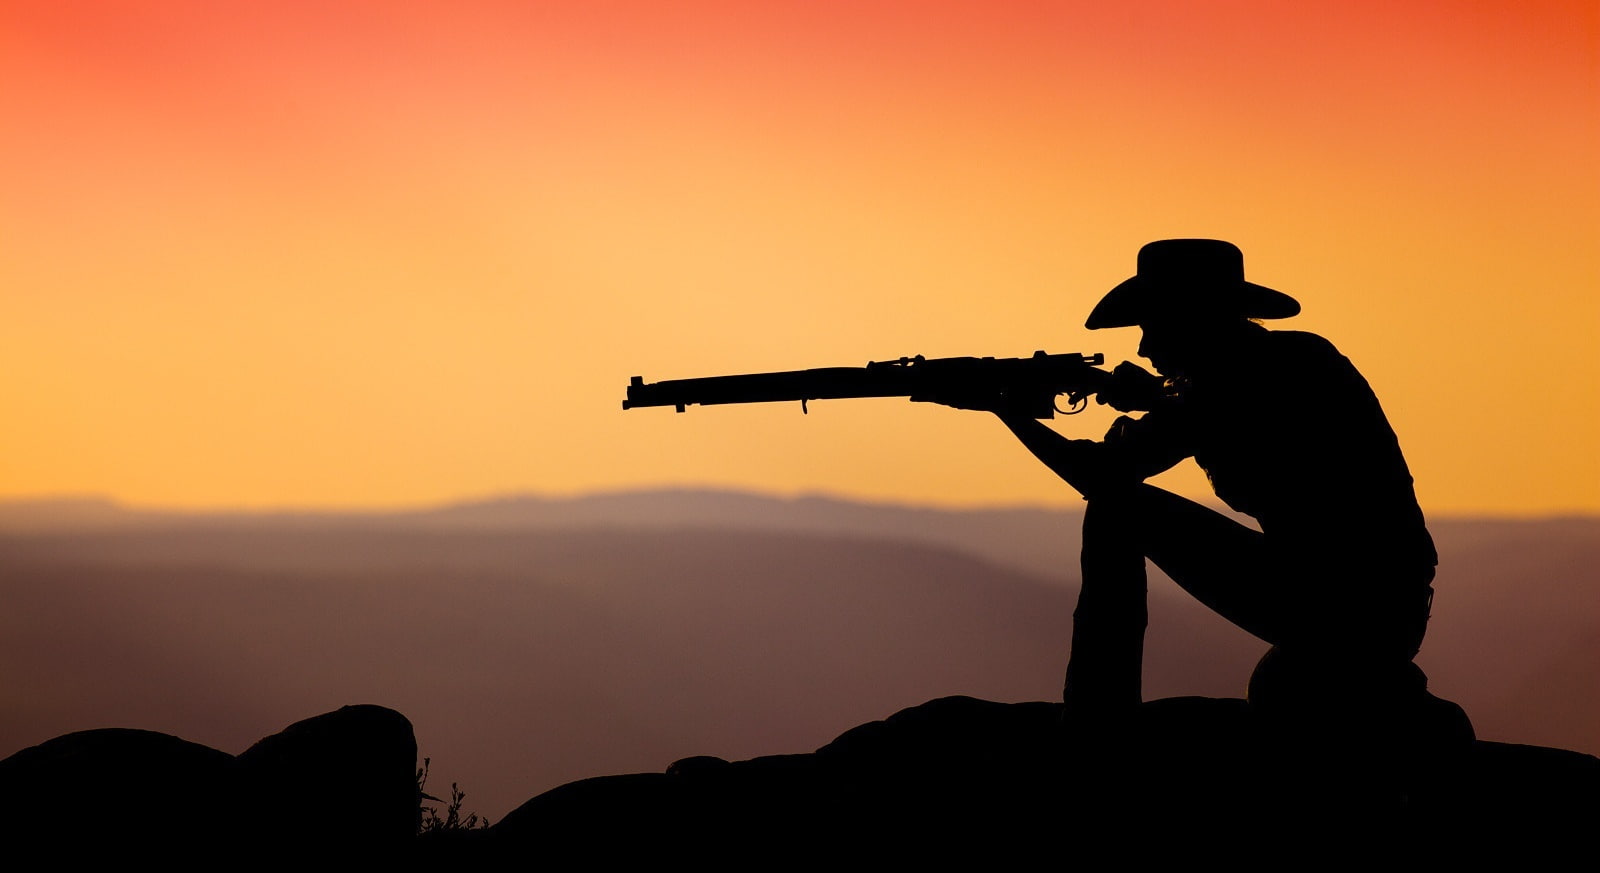 Cowboy Shooting In The Sunset, black hat and hunting rifle, Nature